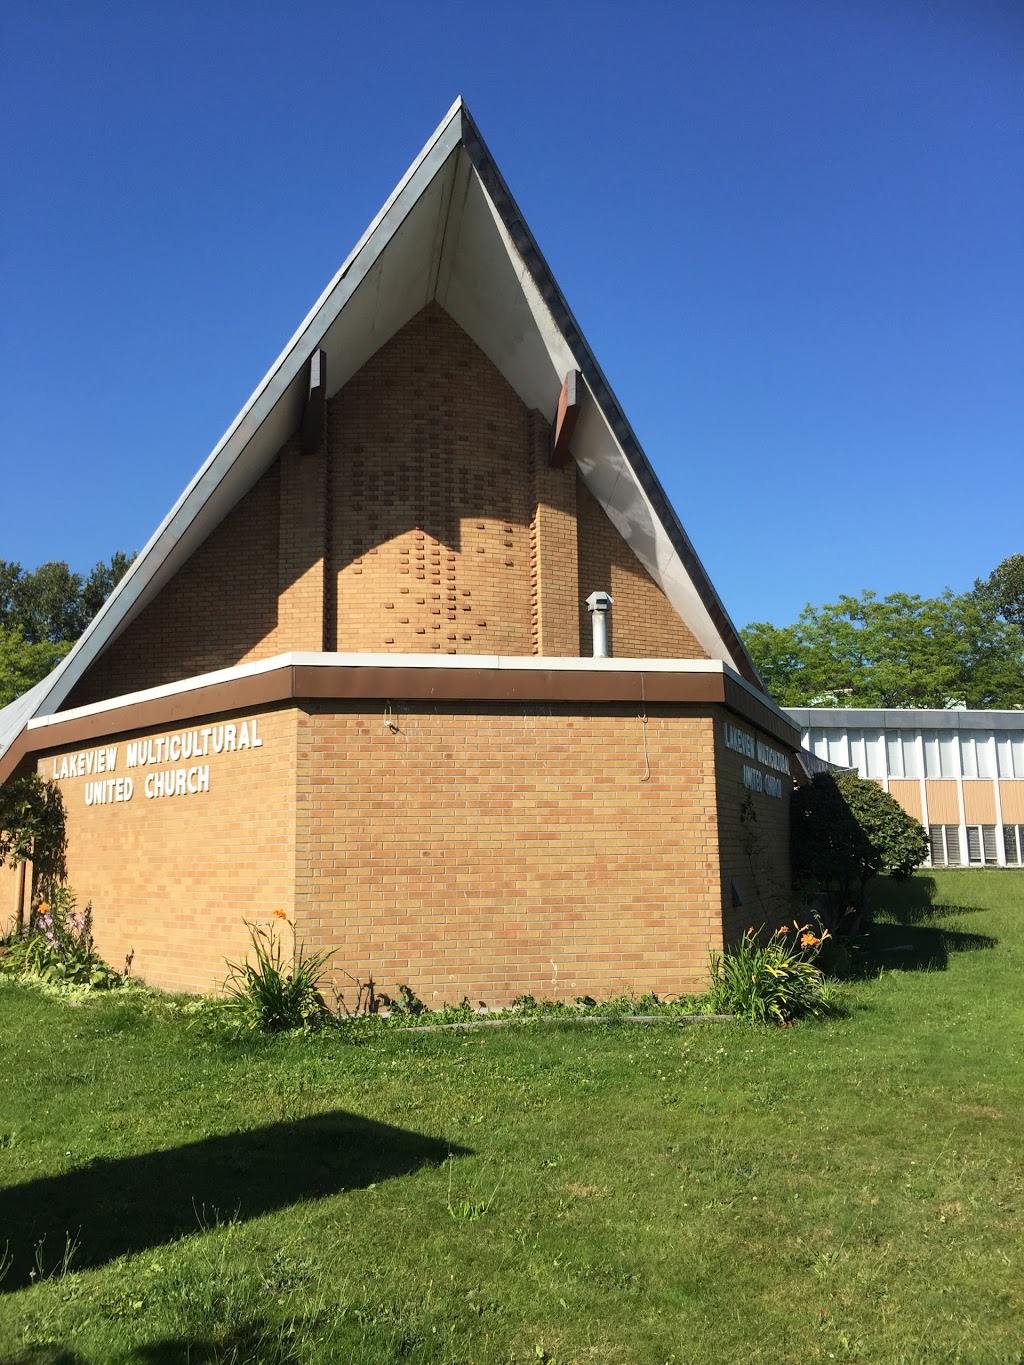 Lakeview Multicultural United Church | 2776 Semlin Dr, Vancouver, BC V5N 4R6, Canada | Phone: (604) 874-0634